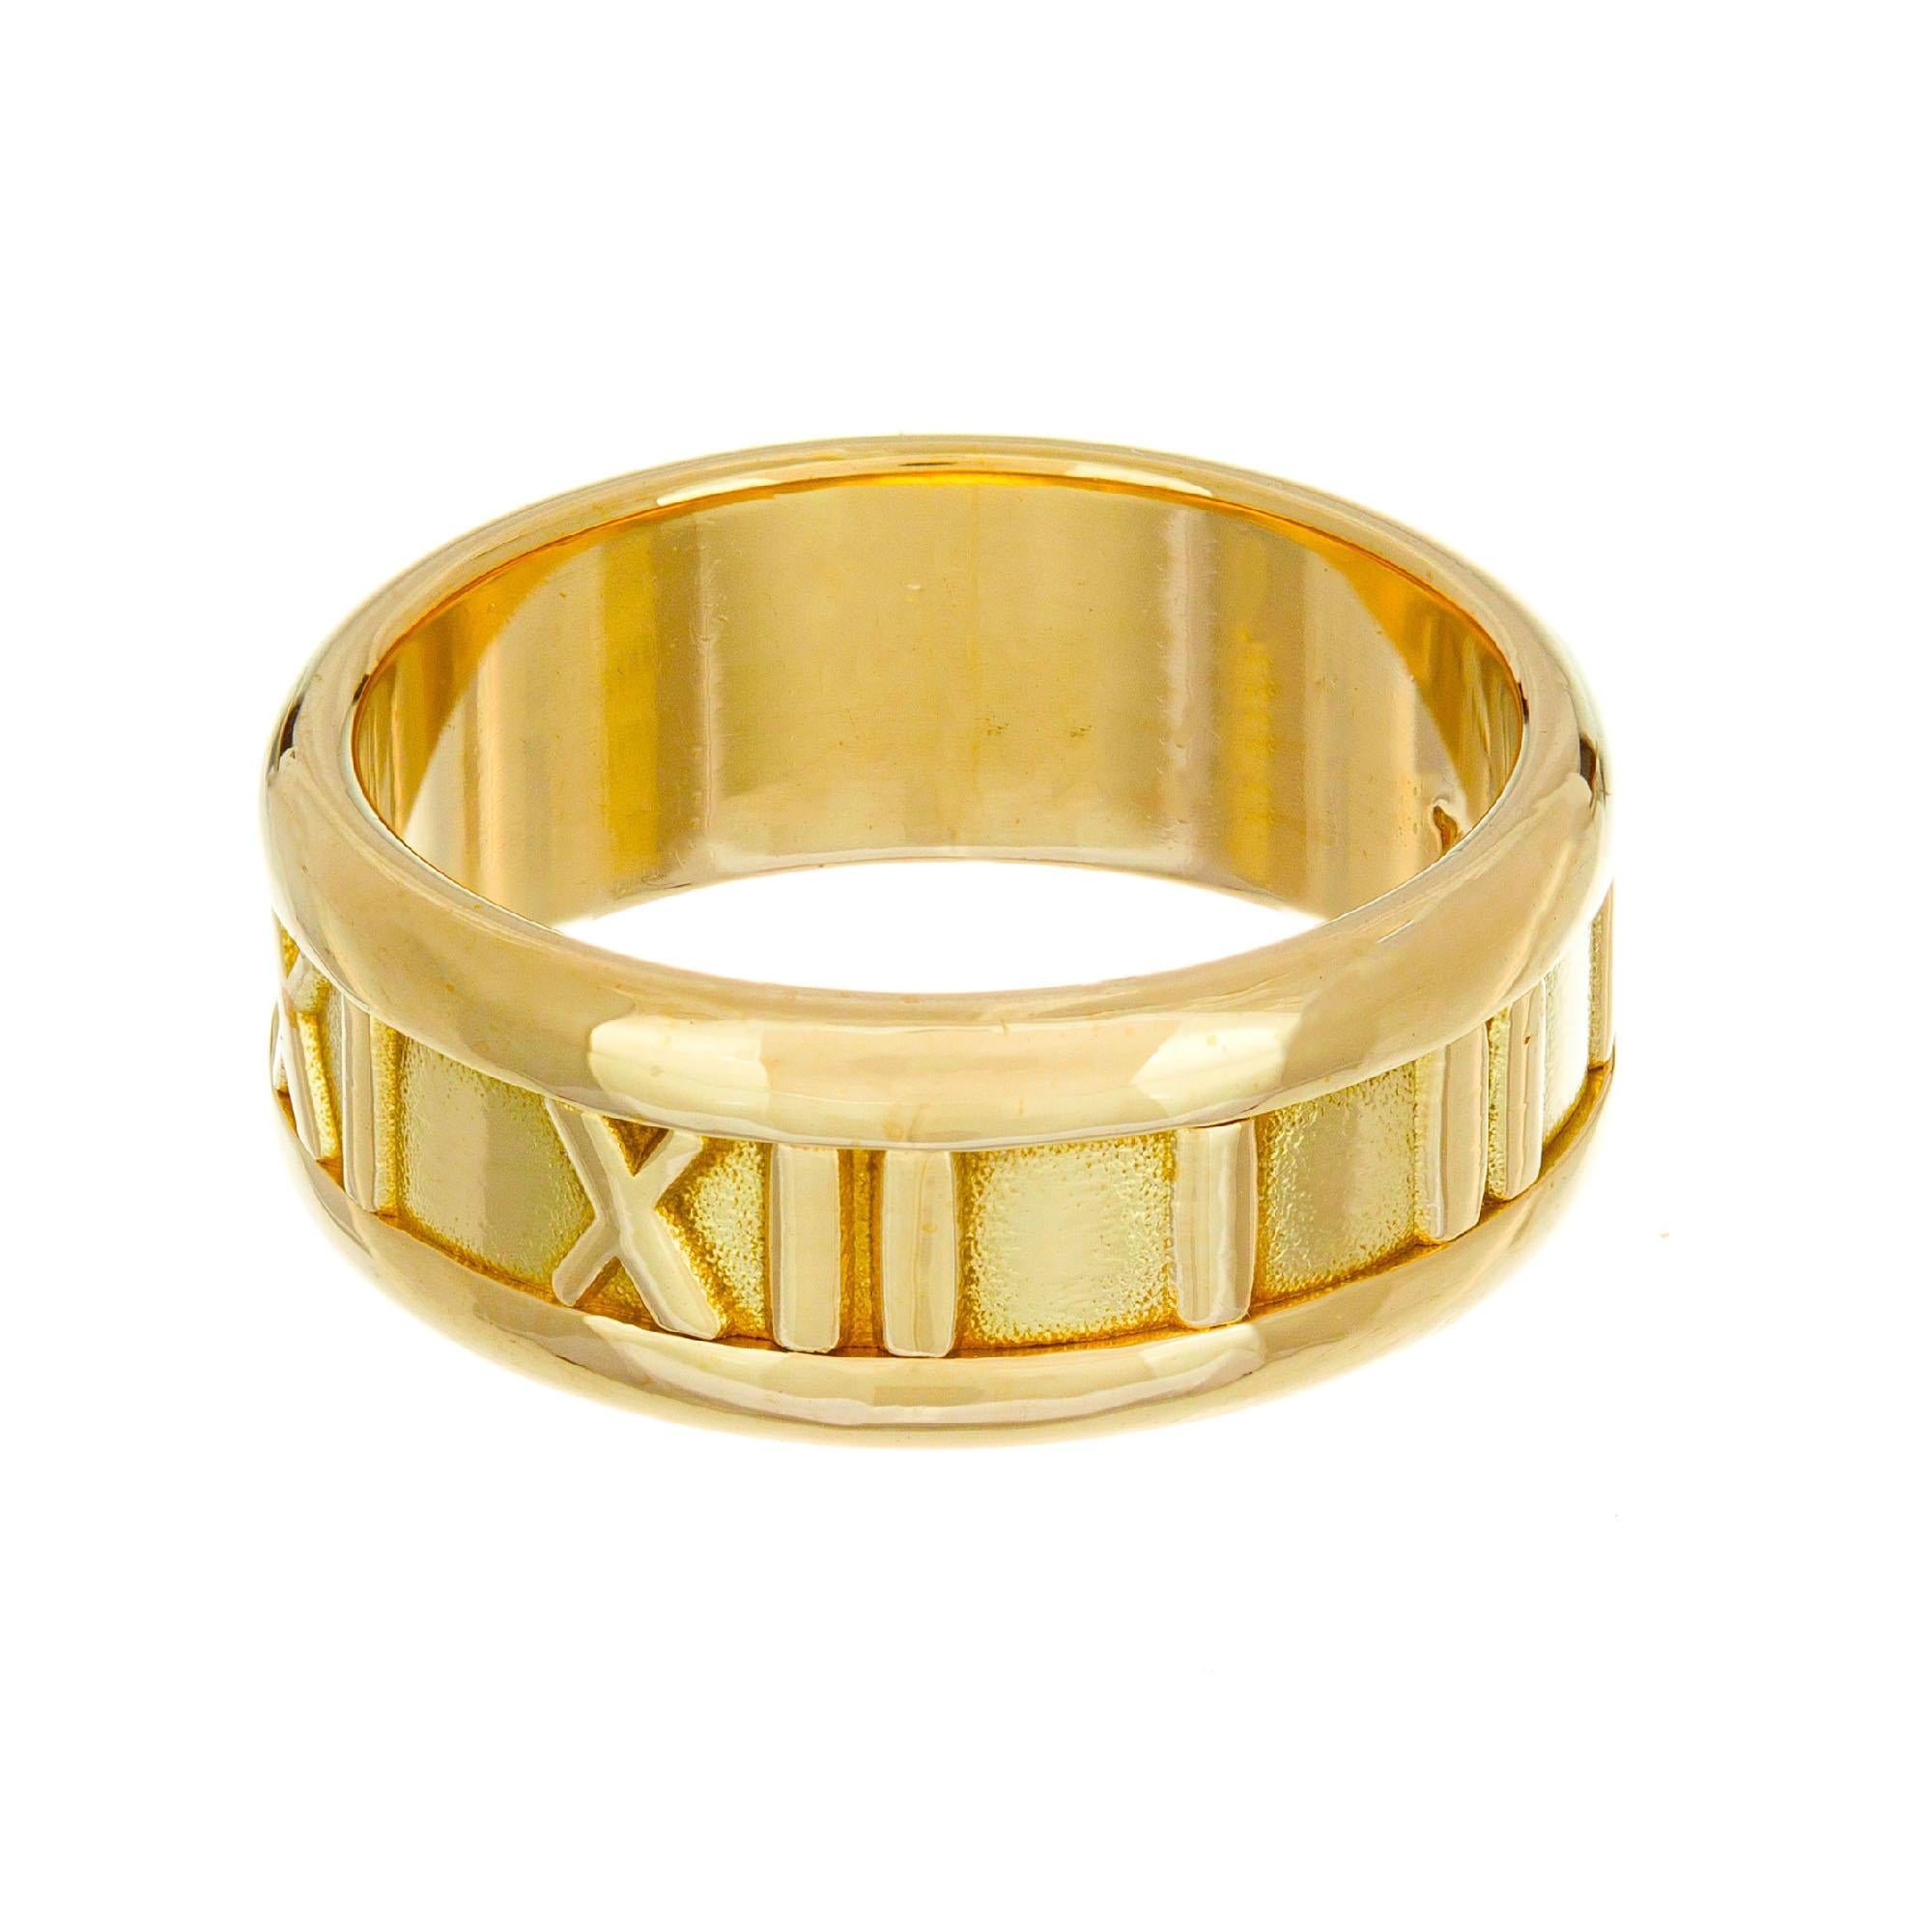 Tiffany & Co 7mm Atlas 18k yellow gold wedding band

Size 6- not easily sizable 
18k yellow gold 
Stamped: 750
Hallmark: Tiffany & Co
8 grams
Width at top: 6.9mm
Height at top: 1.7mm
Width at bottom: 6.9mm



